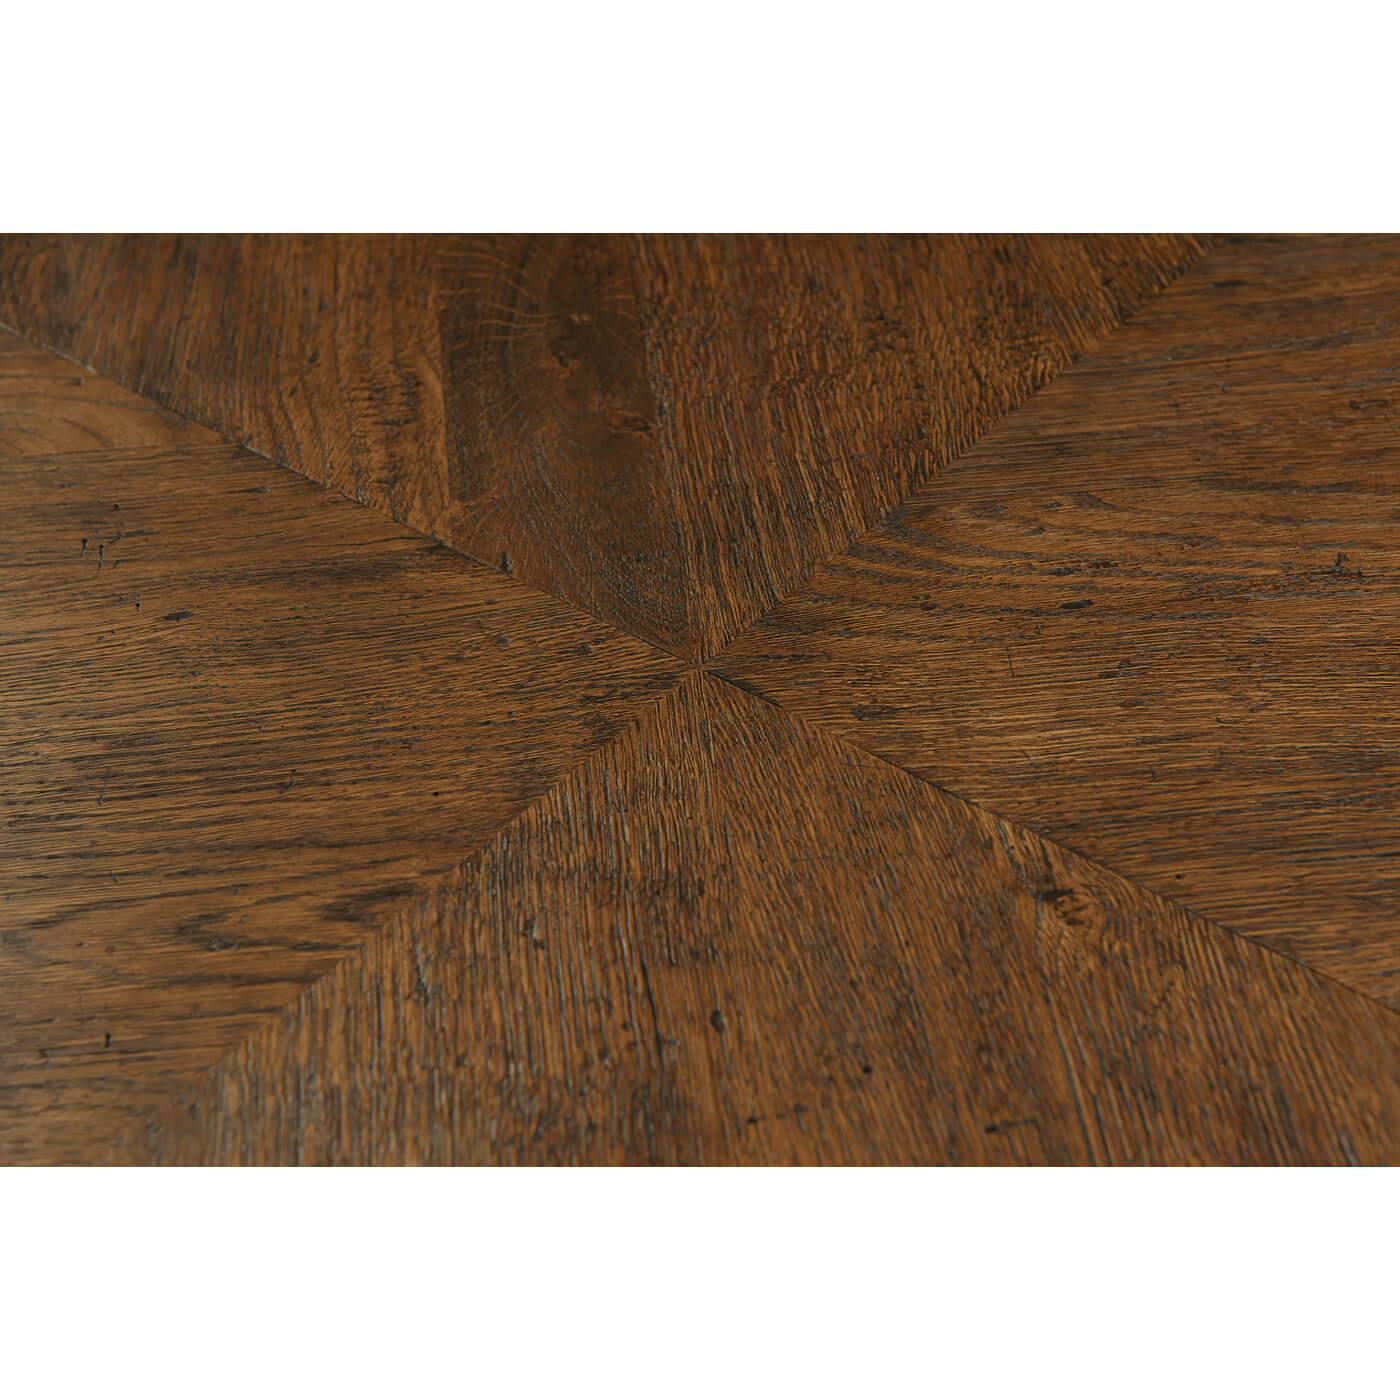 Rustic Dark Oak Parquetry Extending Dining Table For Sale